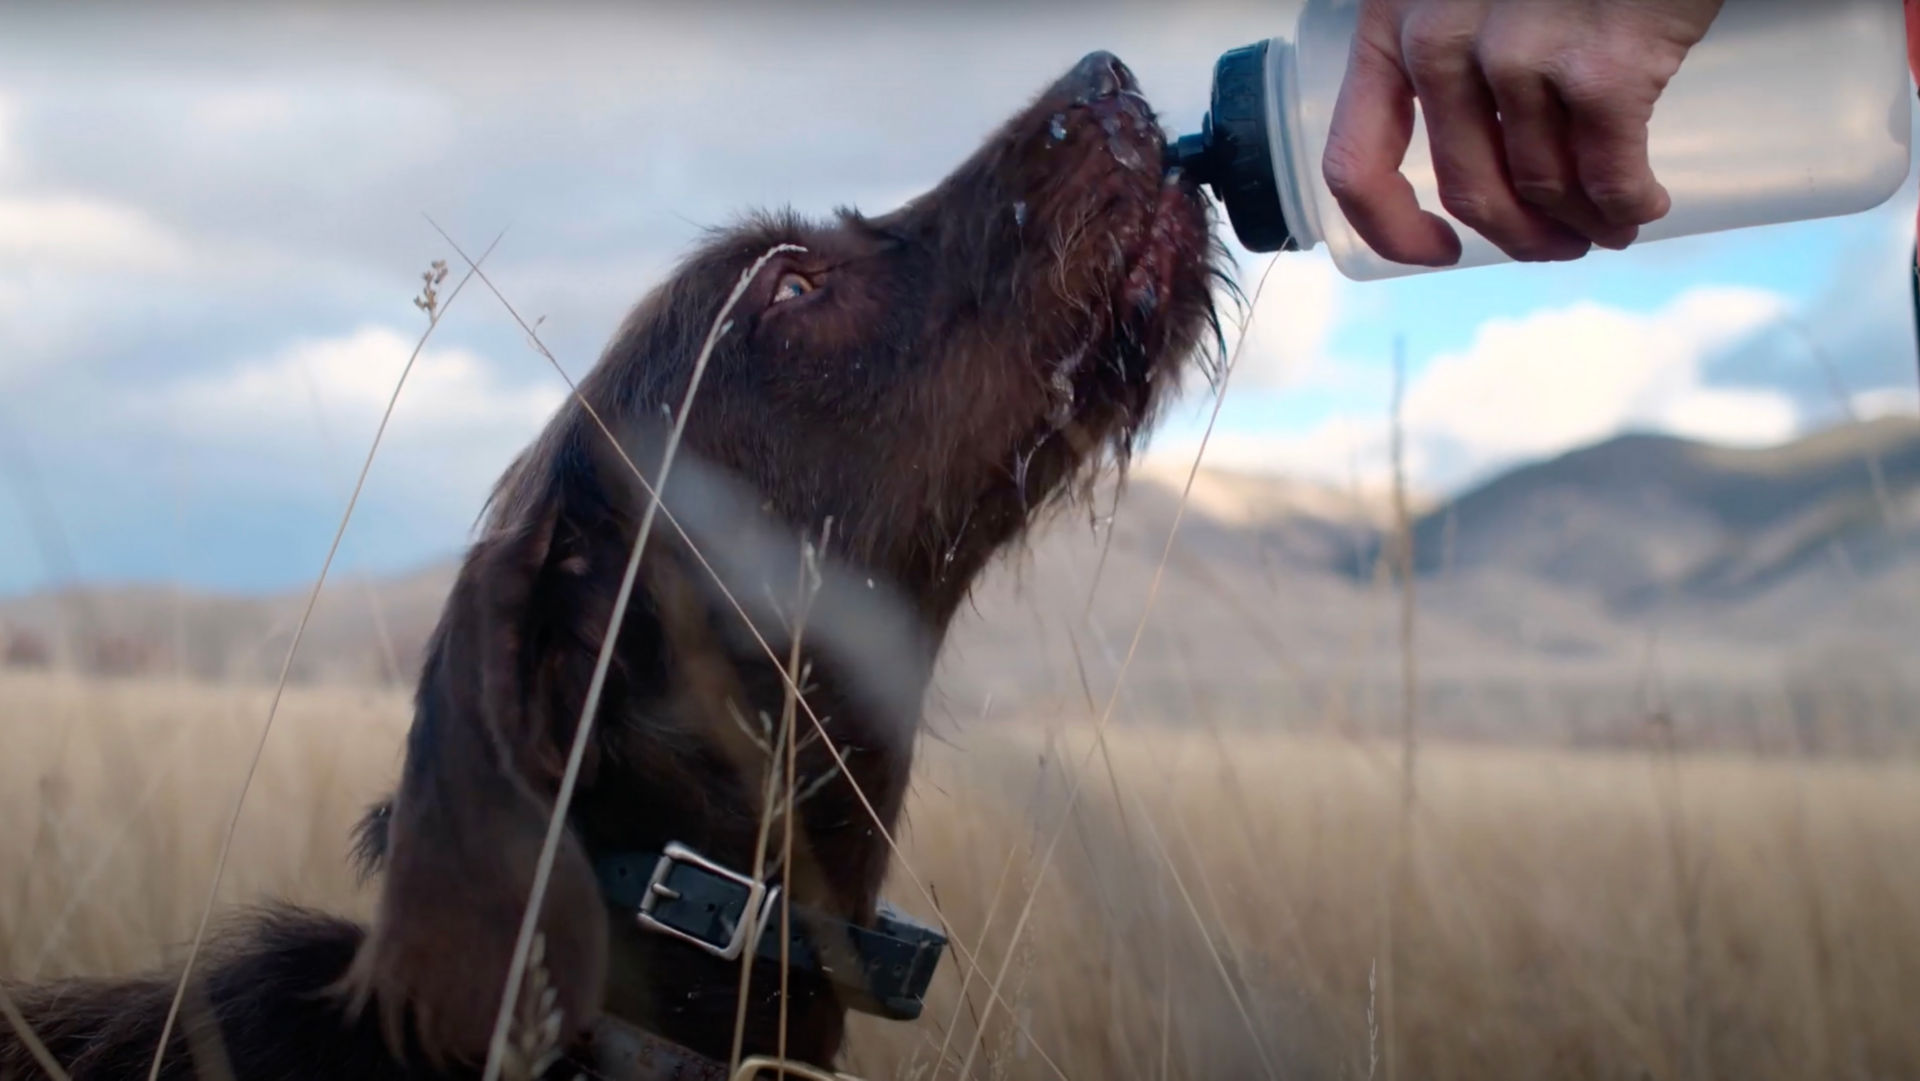 A close up of dog drinking water from a water bottle